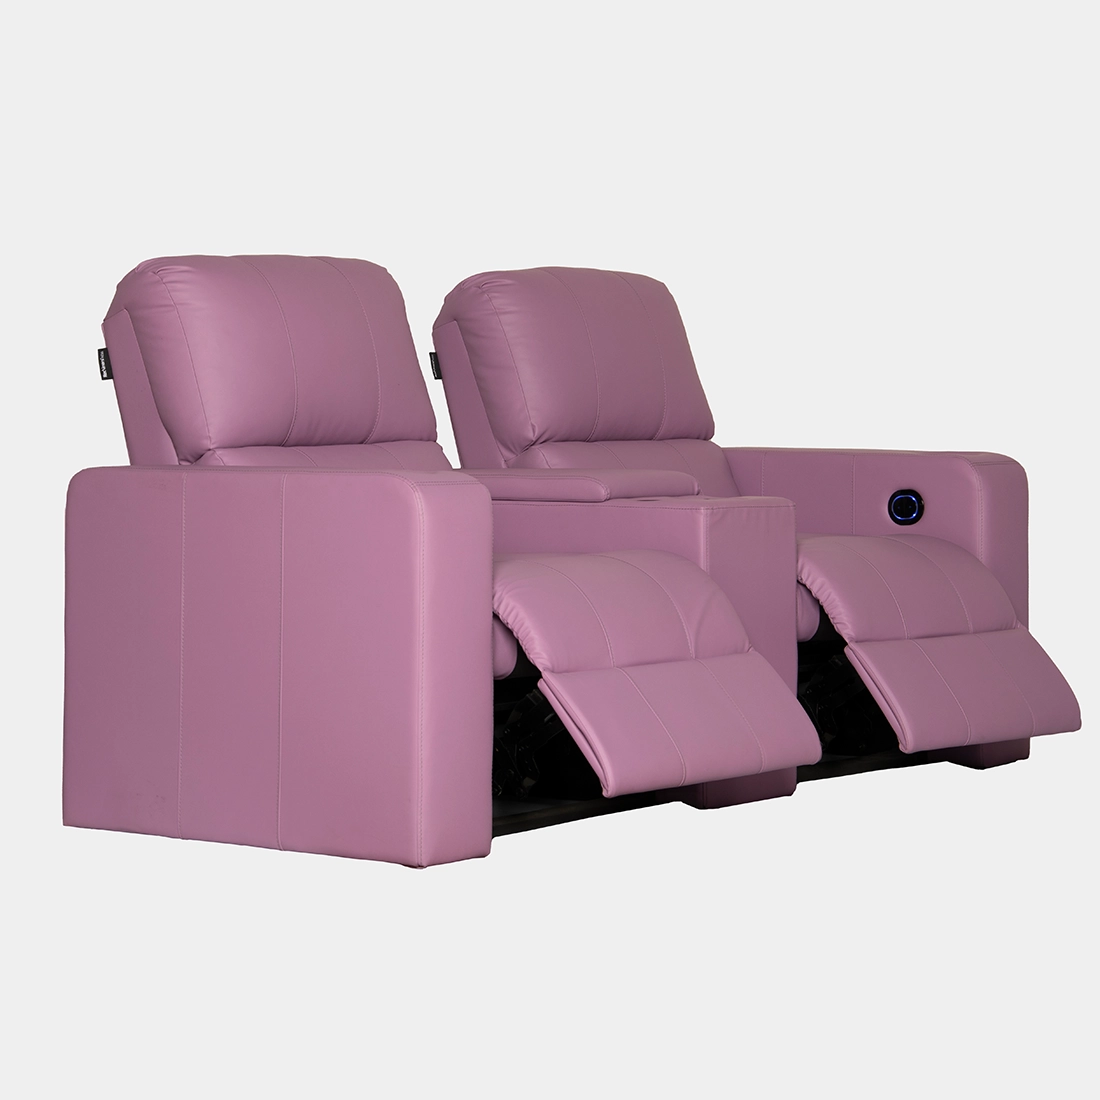 Home Theater Recliner Style-090